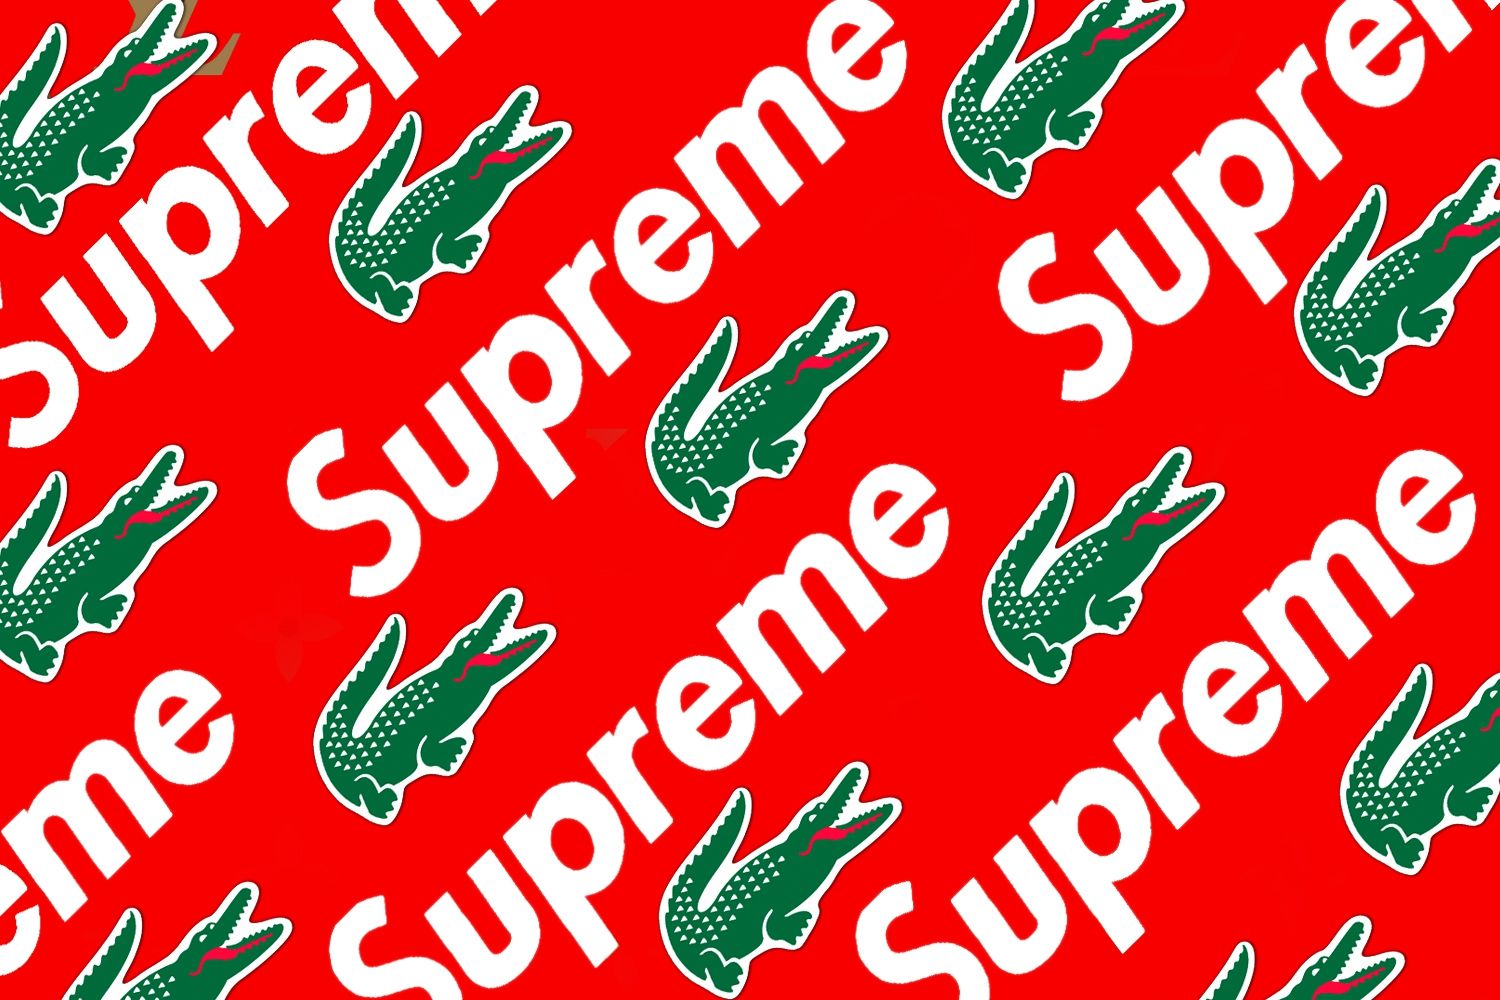 The Supreme Lacoste Collab Is Even Better This Time Around